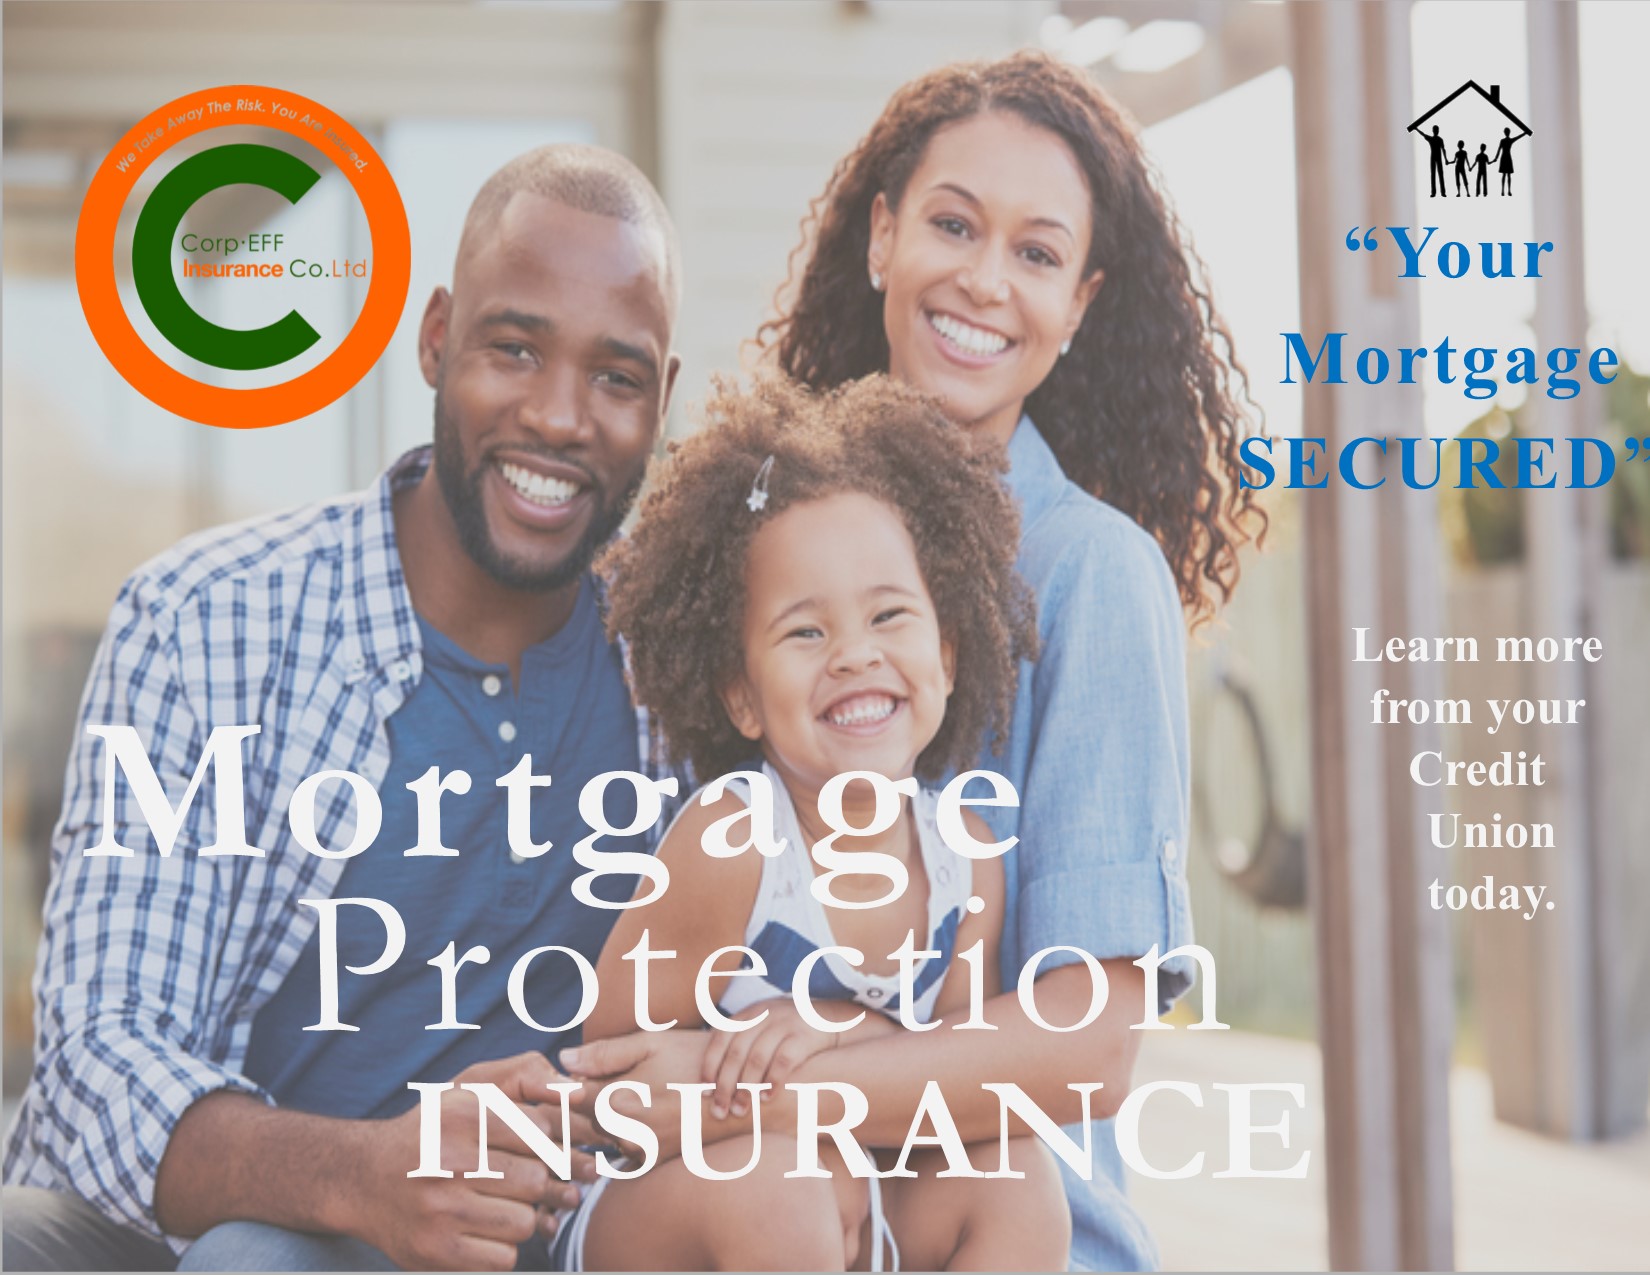 Mortgage Protection Insurance New Logo#2 (1)